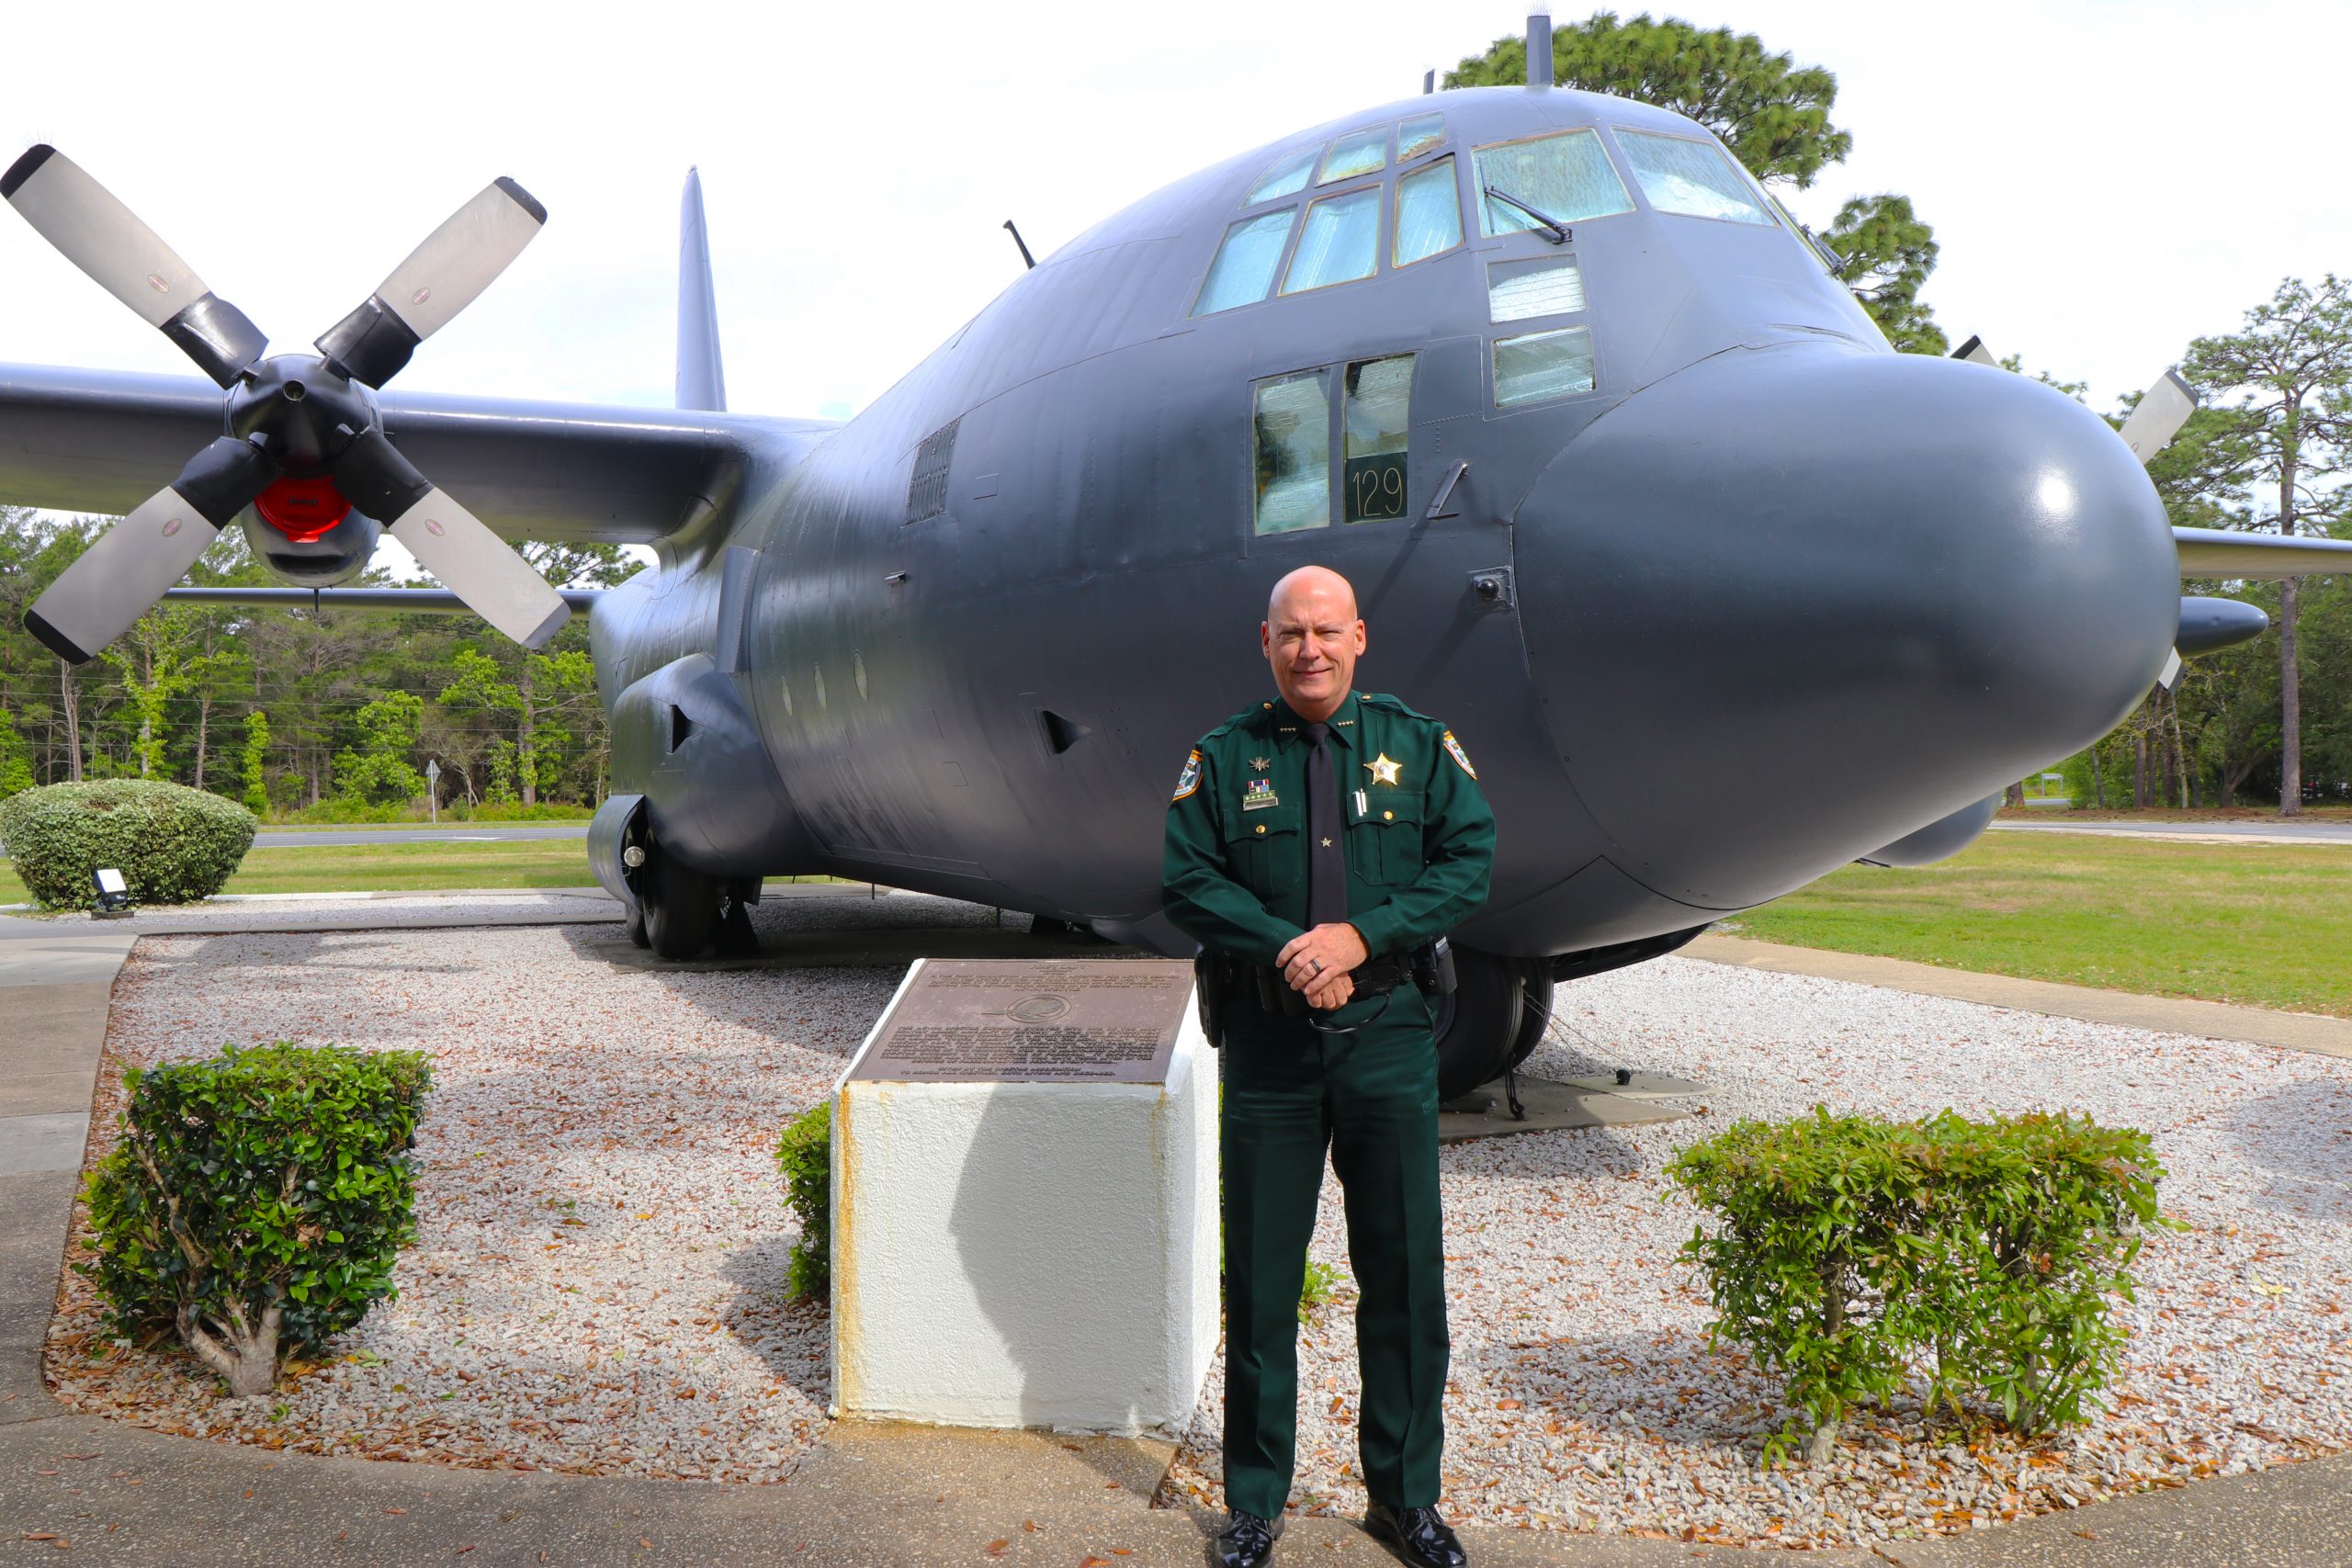 A sheriff in uniform standing in front of a large military transport aircraft with propellers, positioned outdoors.